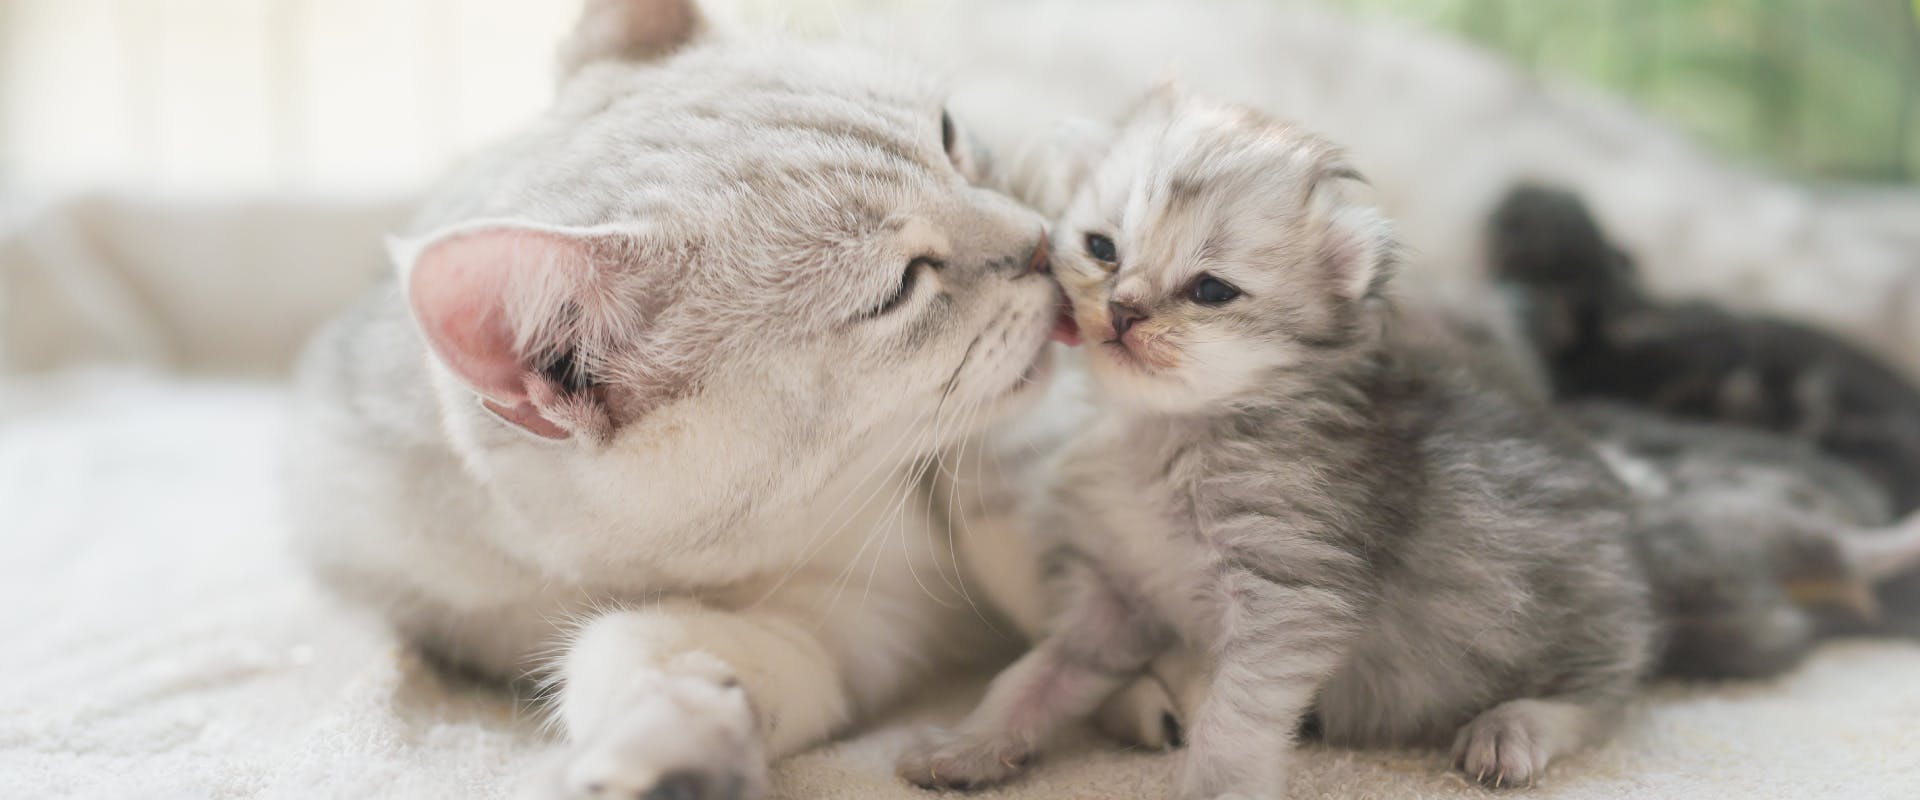 a silver tabby cat lying and washing the face of a new born kitten stood next to her